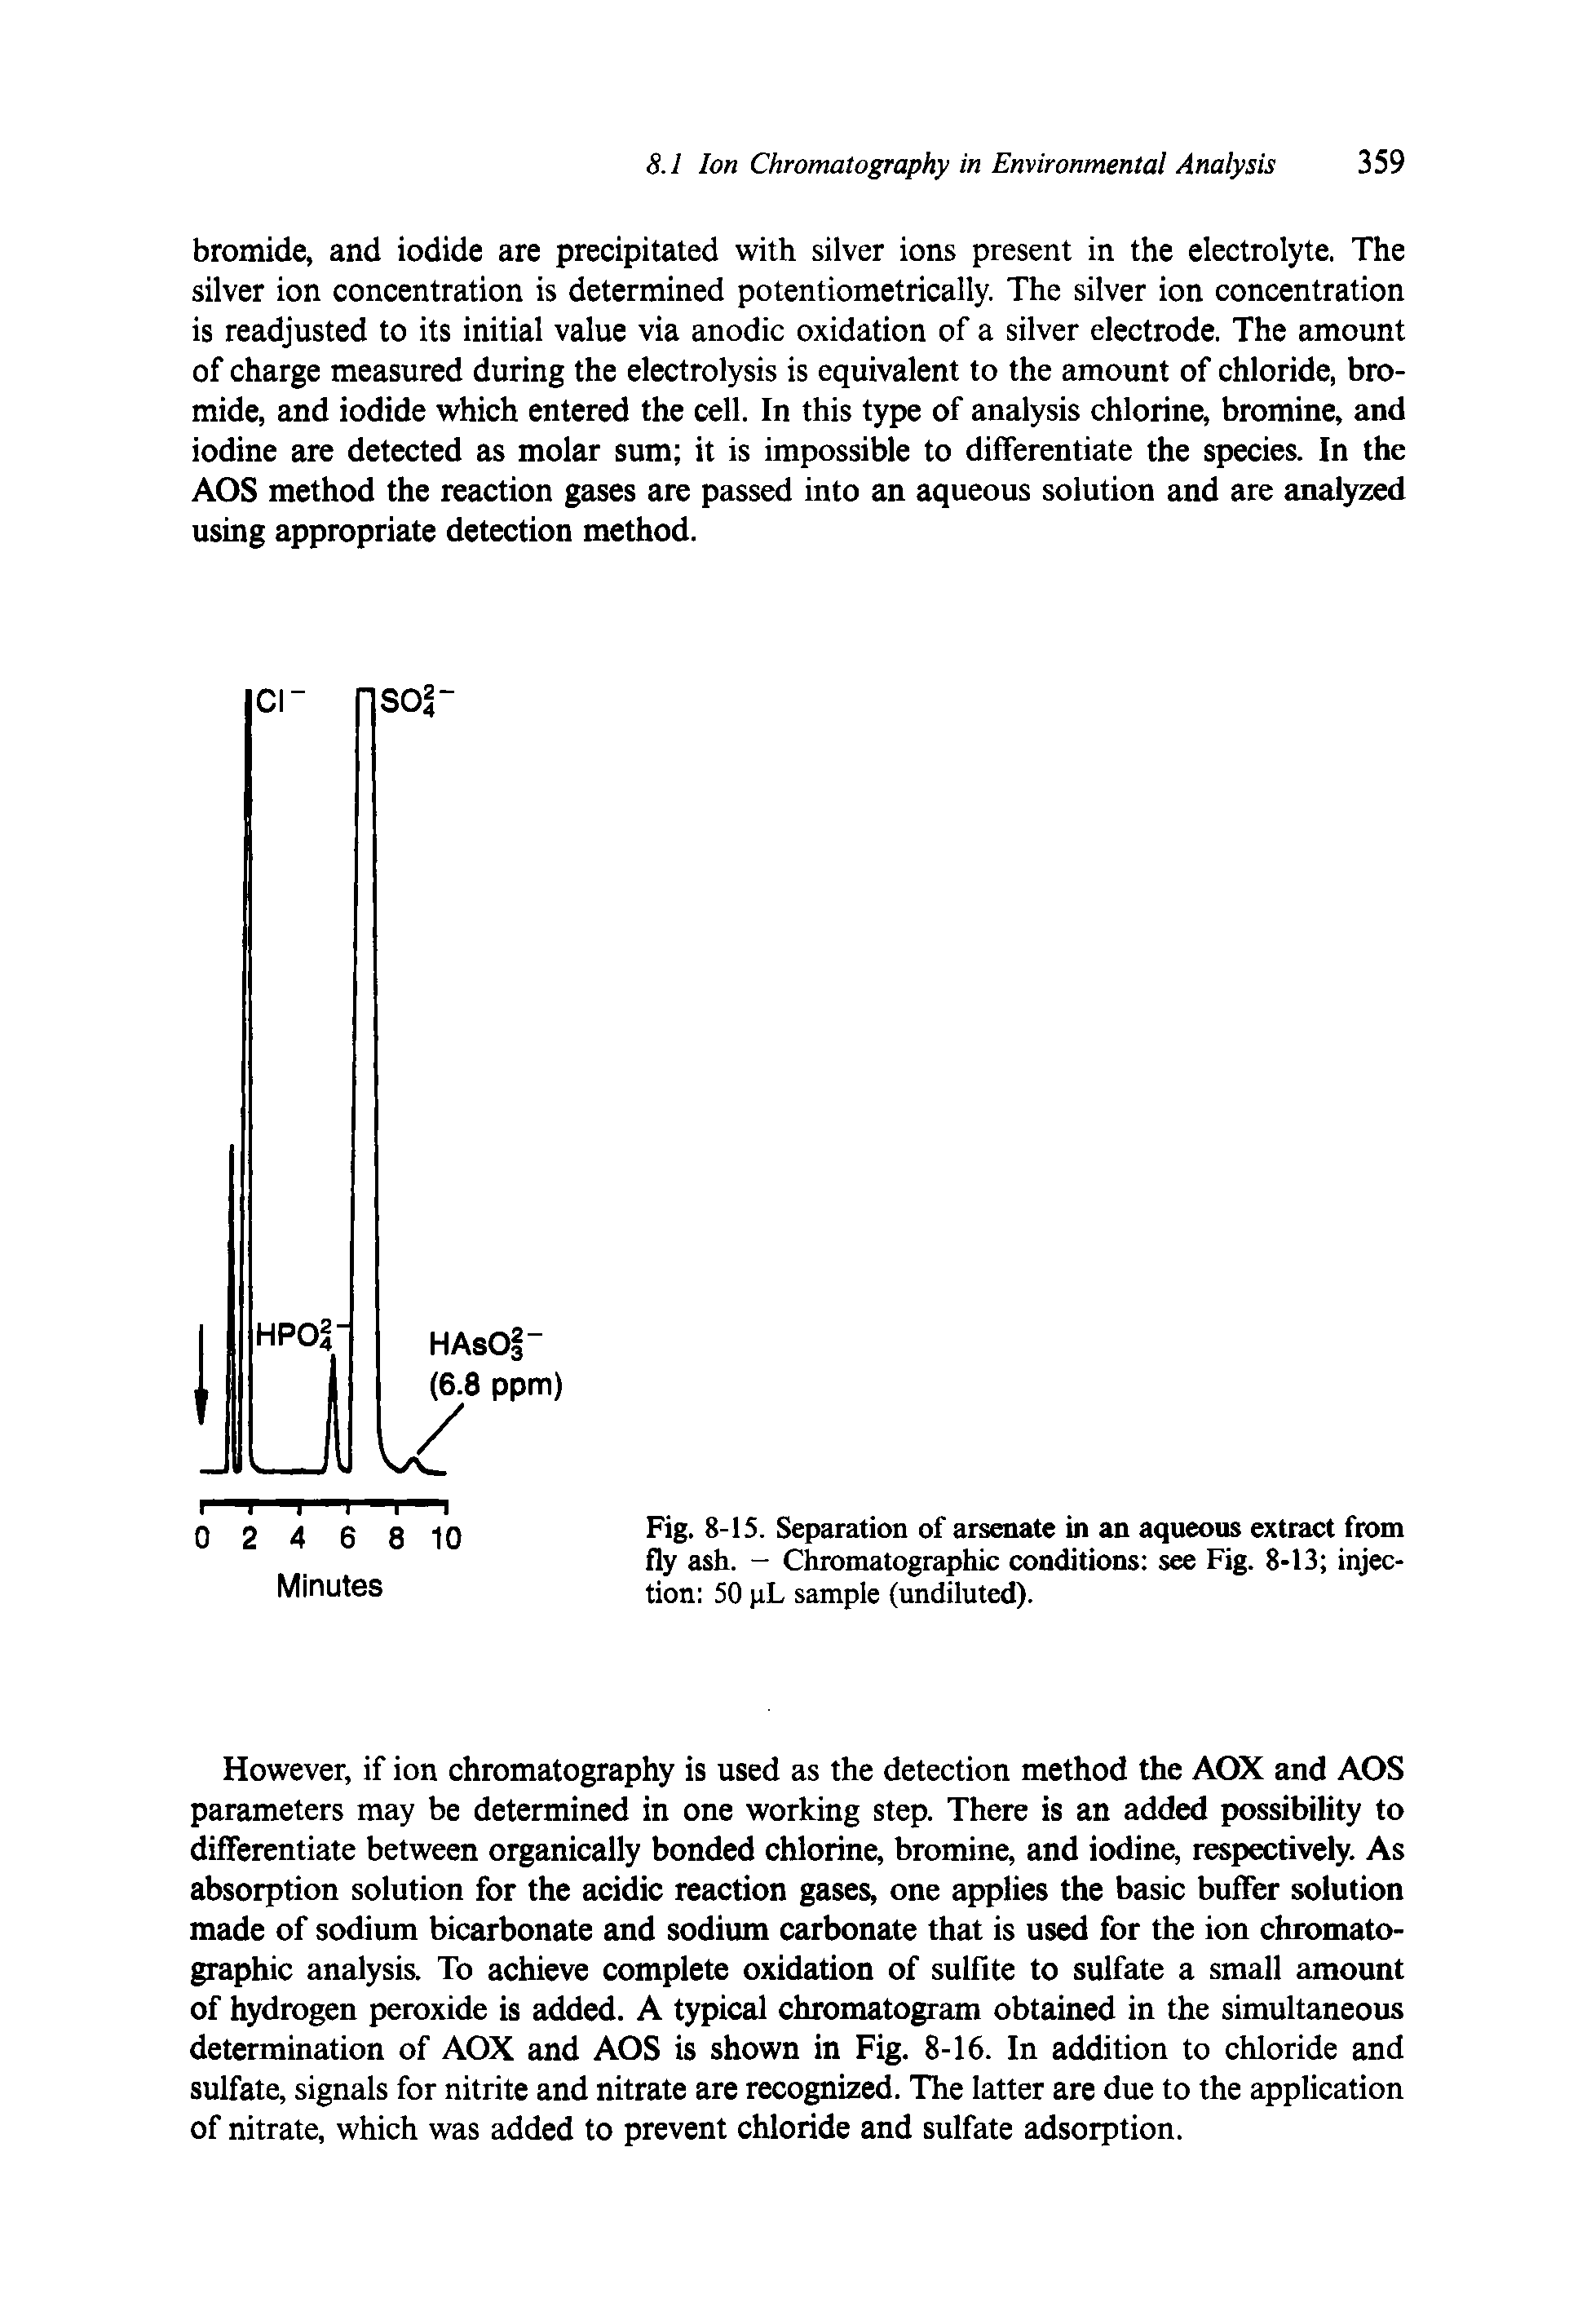 Fig. 8-15. Separation of arsenate in an aqueous extract from fly ash. - Chromatographic conditions see Fig. 8-13 injection 50 pL sample (undiluted).